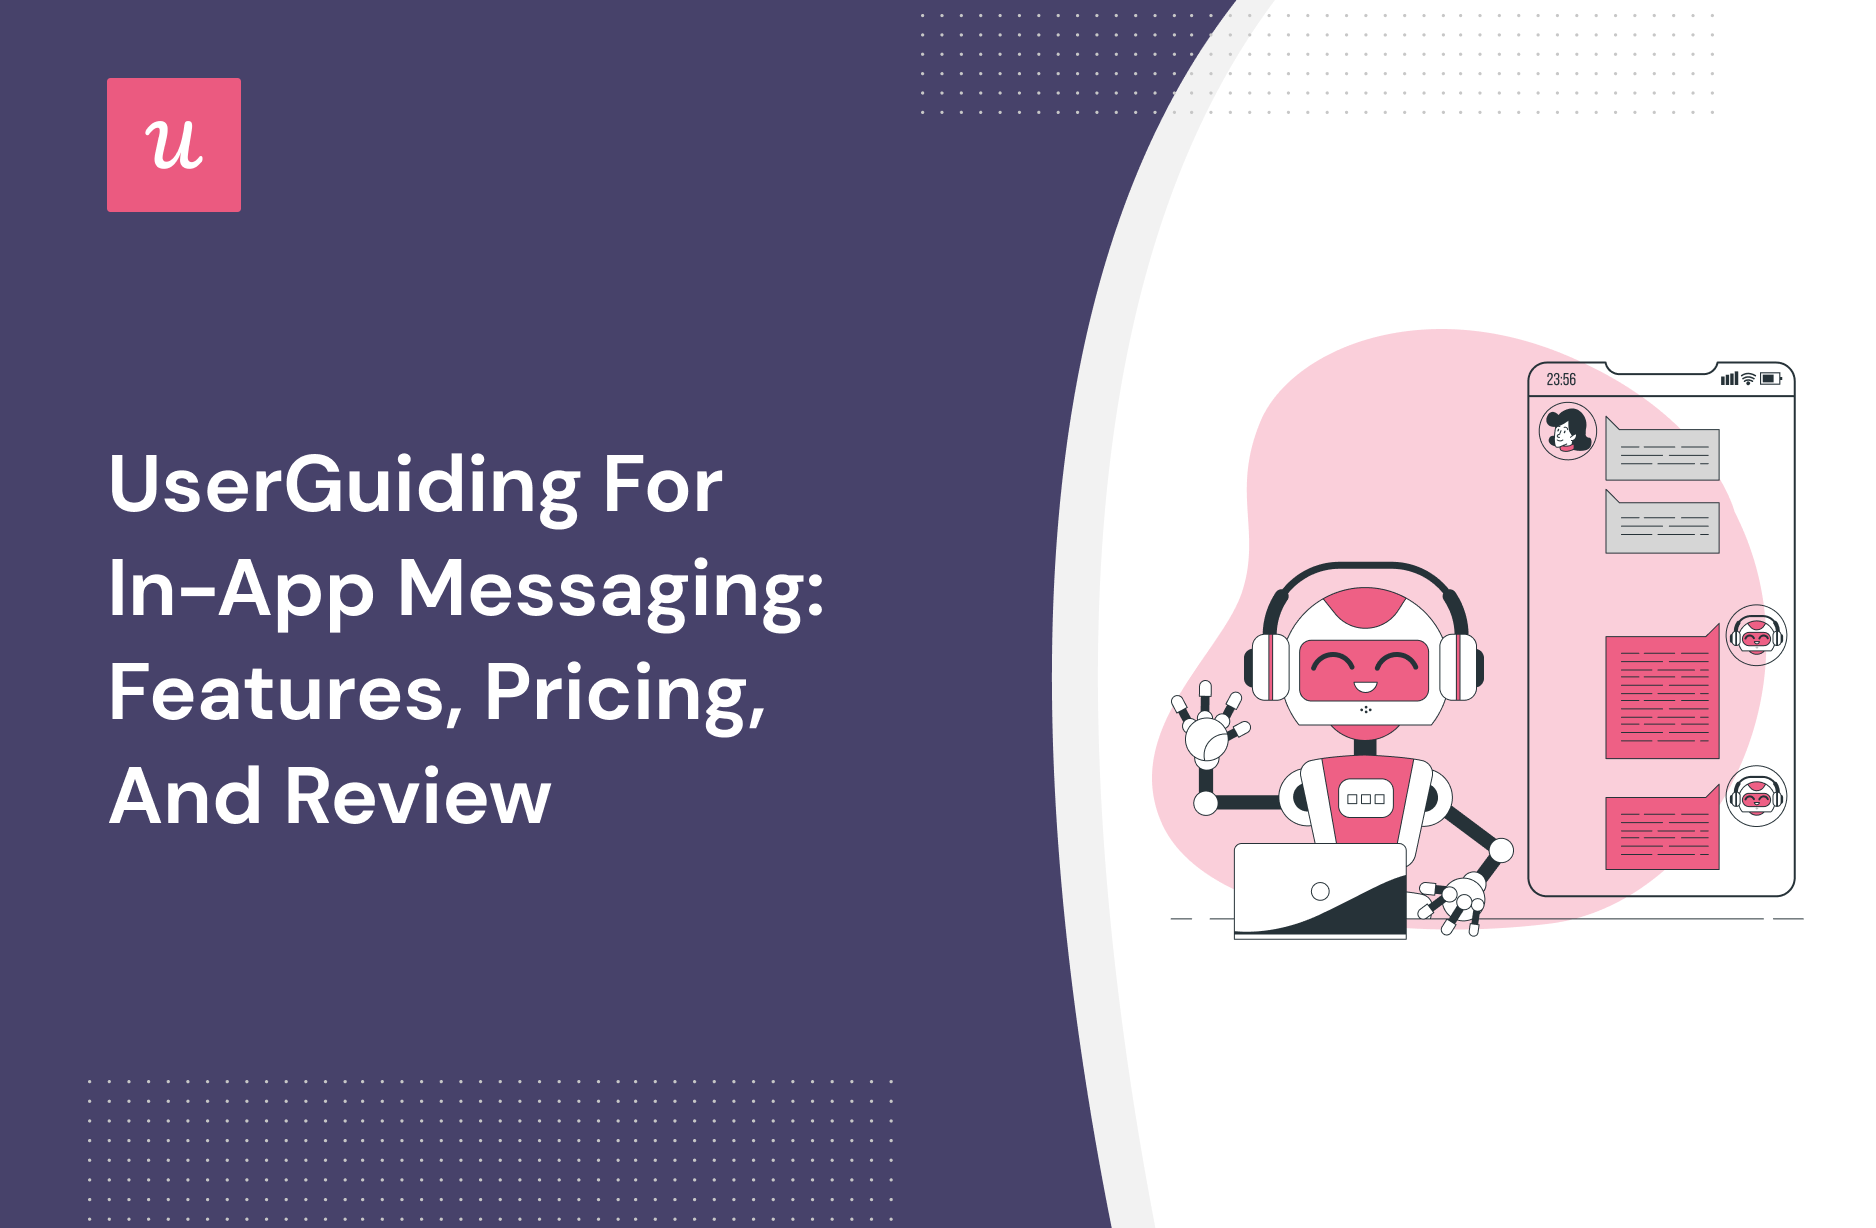 UserGuiding for In-app messaging: Features, Pricing, and Review